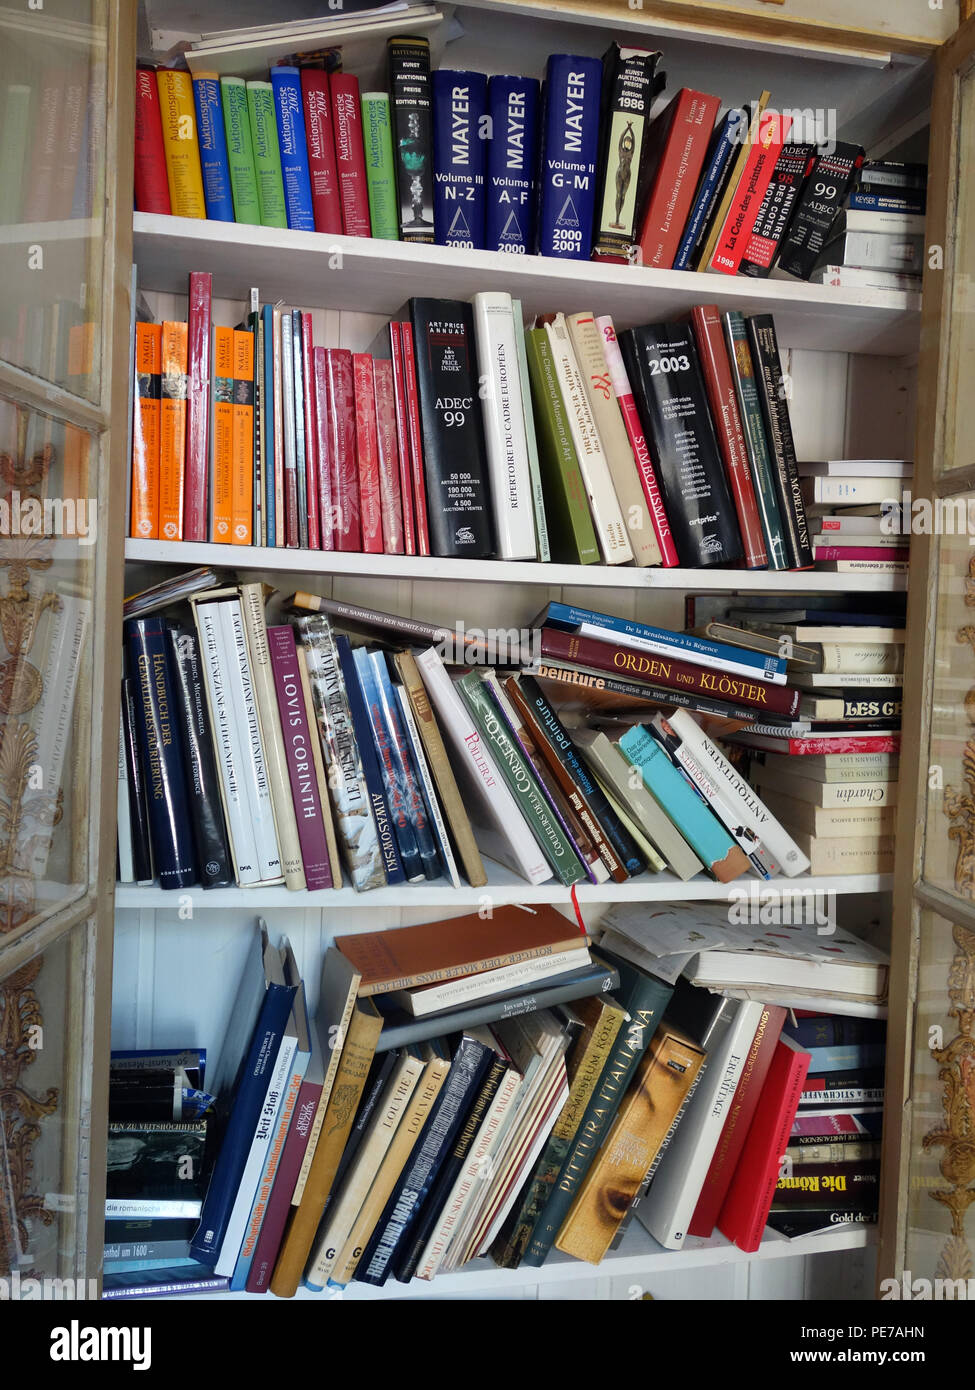 haphazard collection of books badly arranged on book shelf Stock Photo